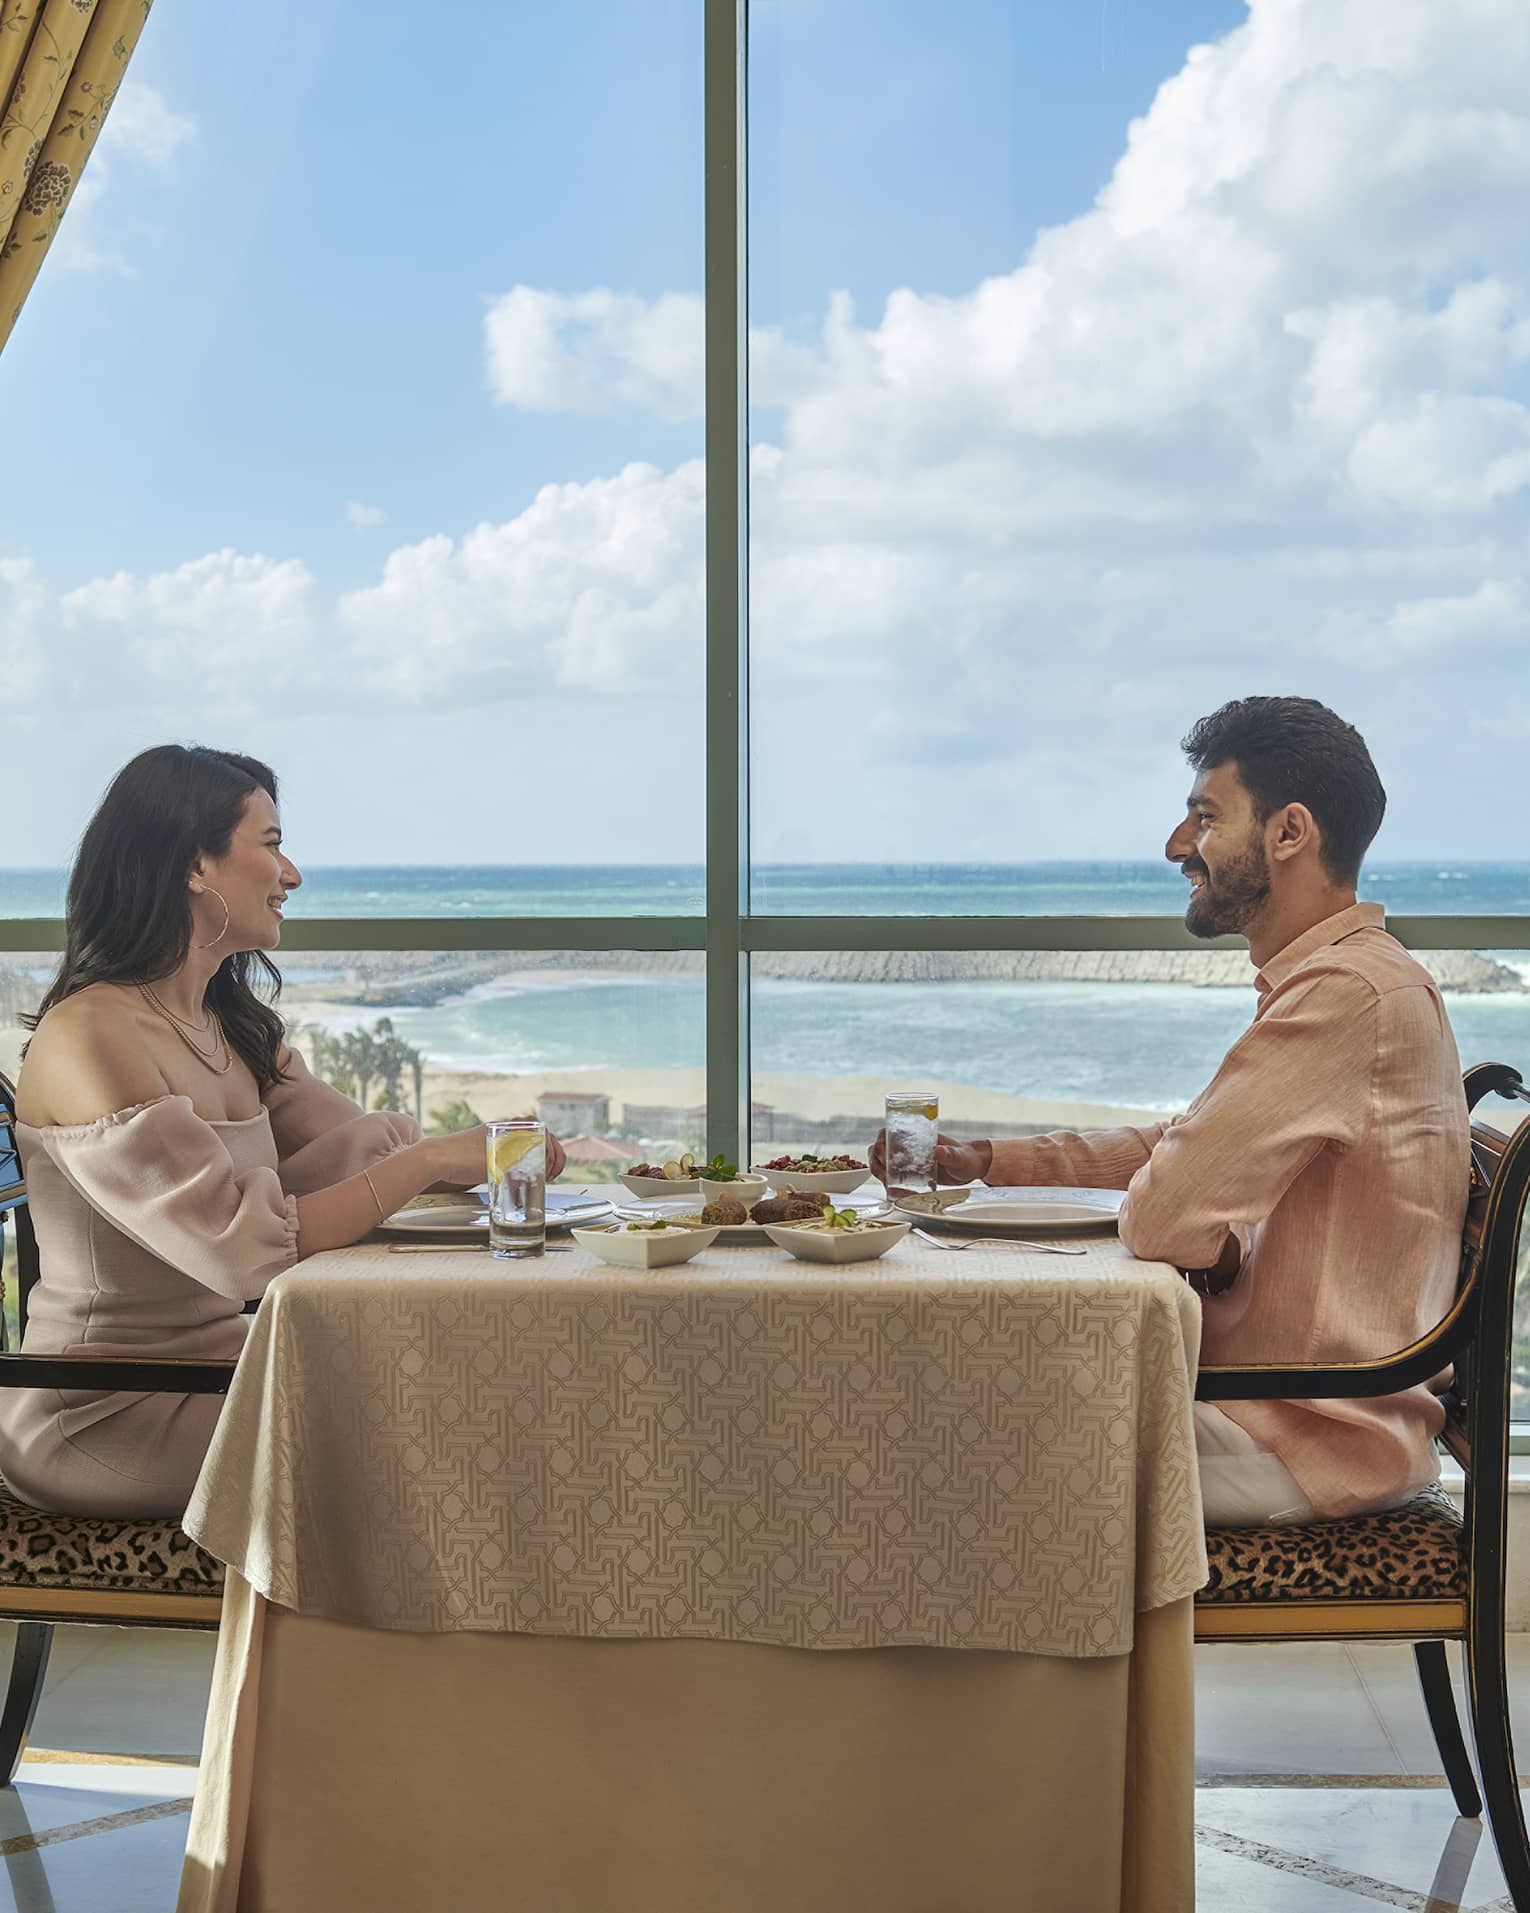 Couple enjoys a meal at Byblos Restaurant with views of the Mediterranean Sea